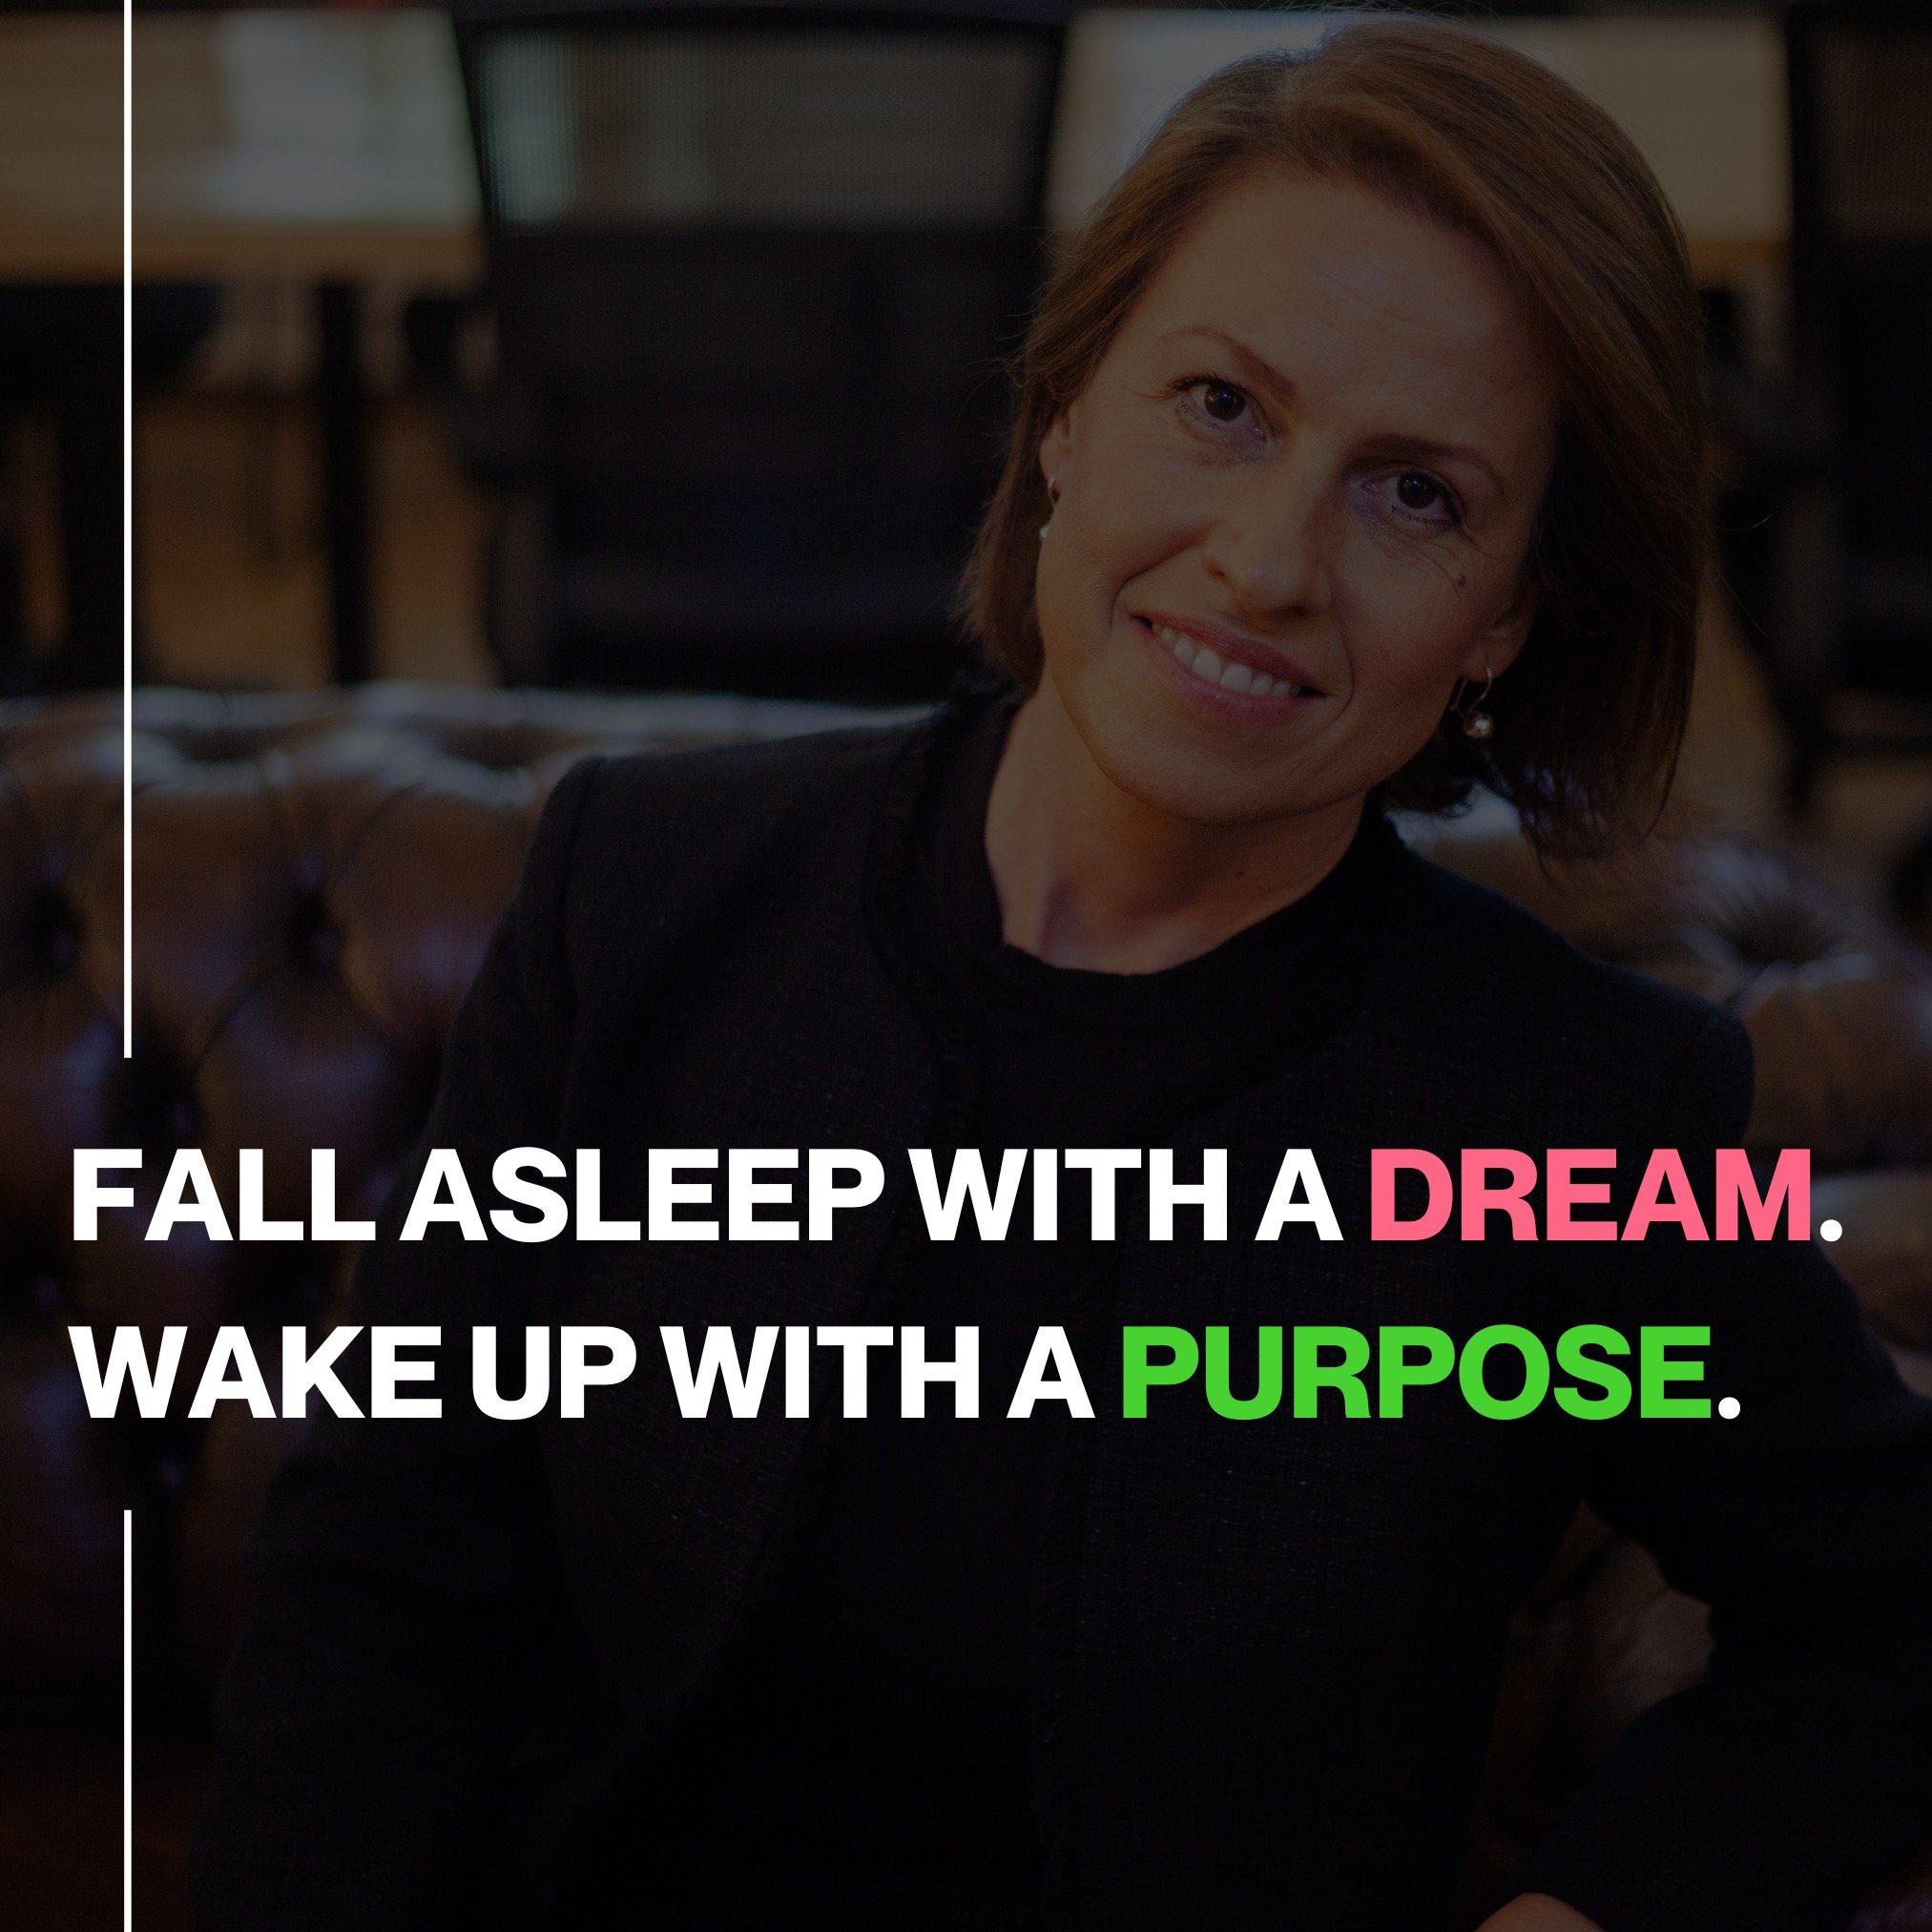 &quot;Fall Asleep with a Dream. Wake Up with a Purpose.&quot; 💭✨ 

This quote hits home for so many reasons. Here are six everyday reminders why it's not just a saying, but a way of life:

1️⃣ Motivation: Dreaming fuels our motivation. When we fall 